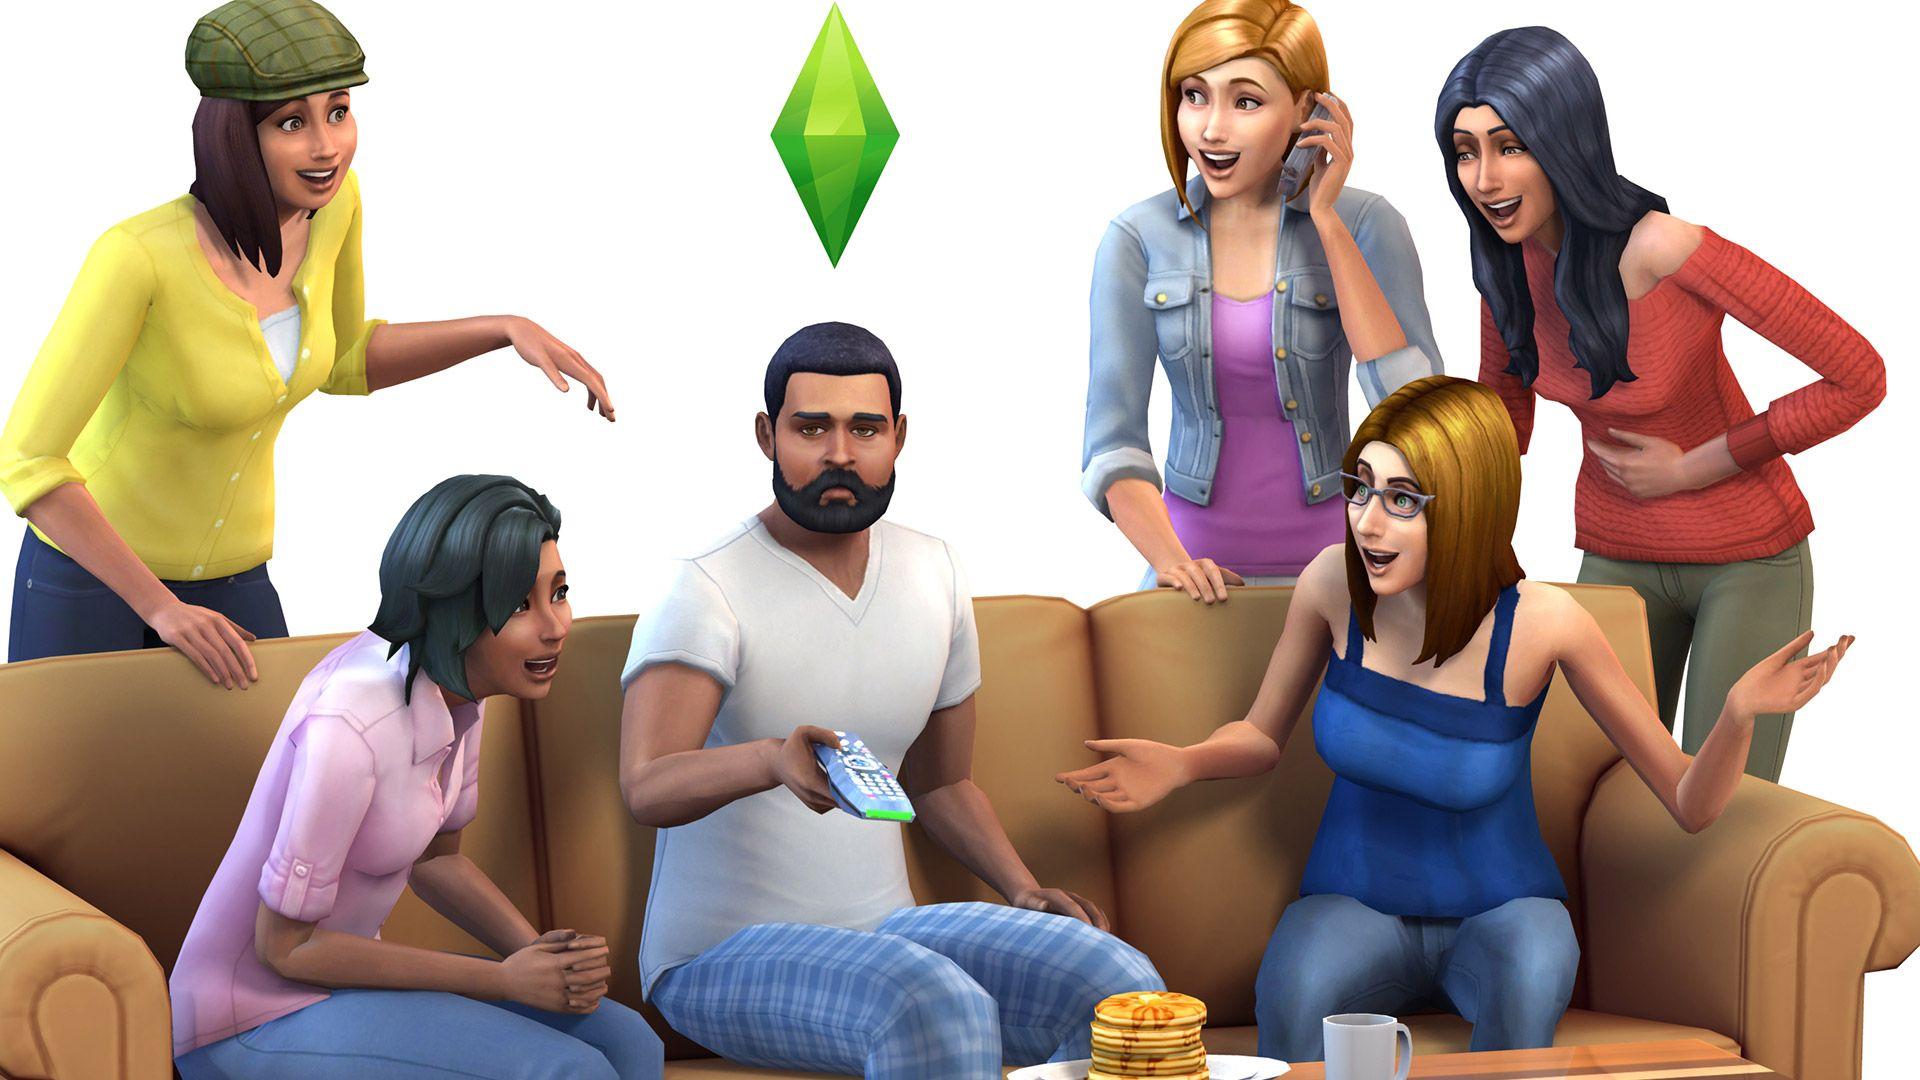 The Sims 4 wallpaper 3